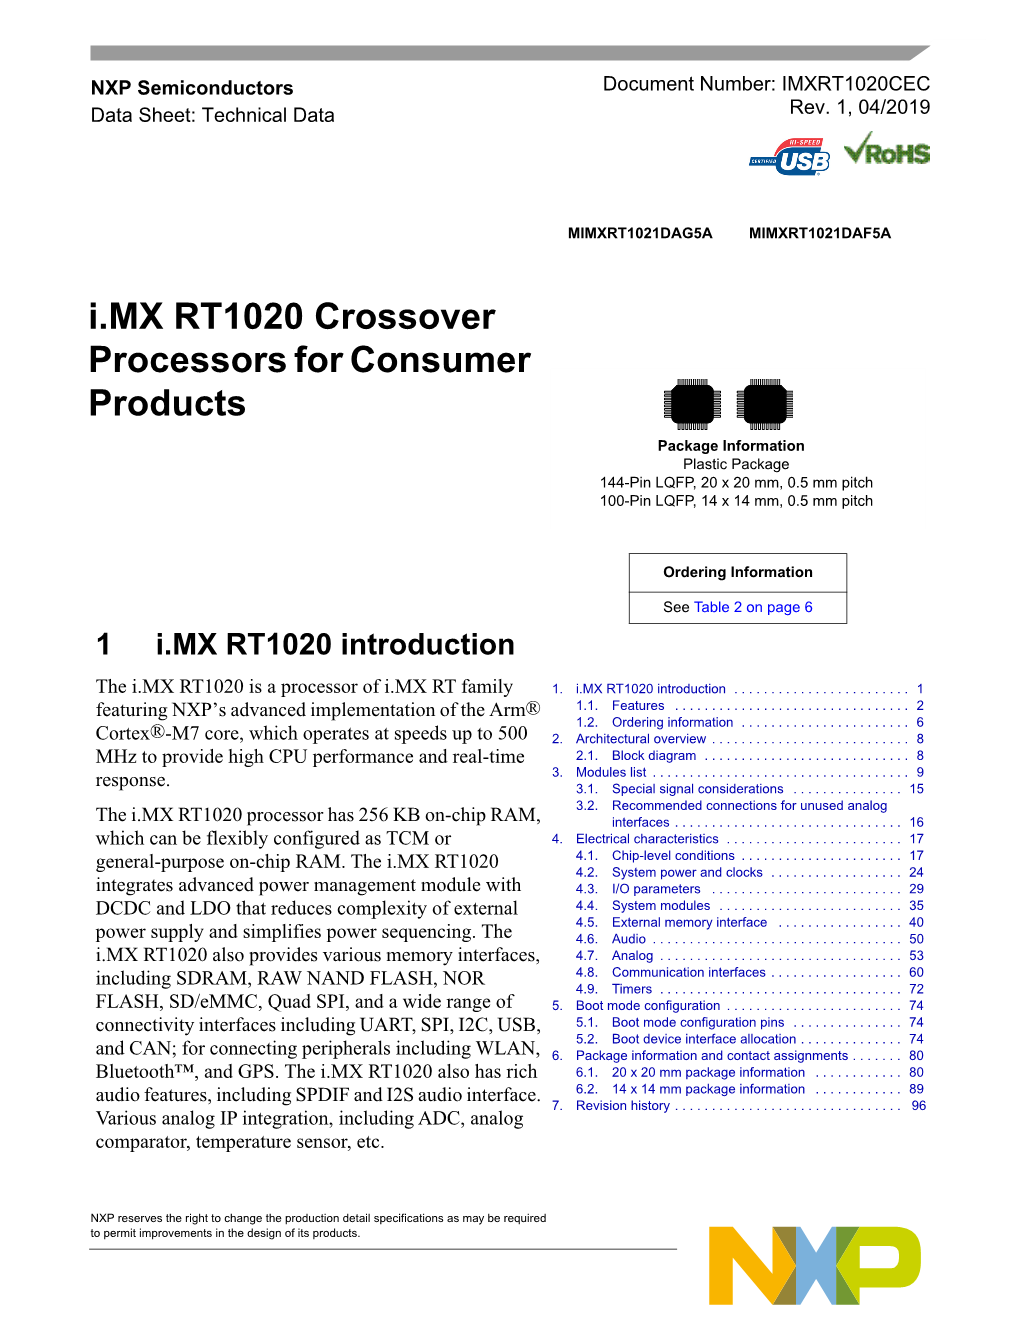 I.MX RT1020 Crossover Proessors for Consurmer Products